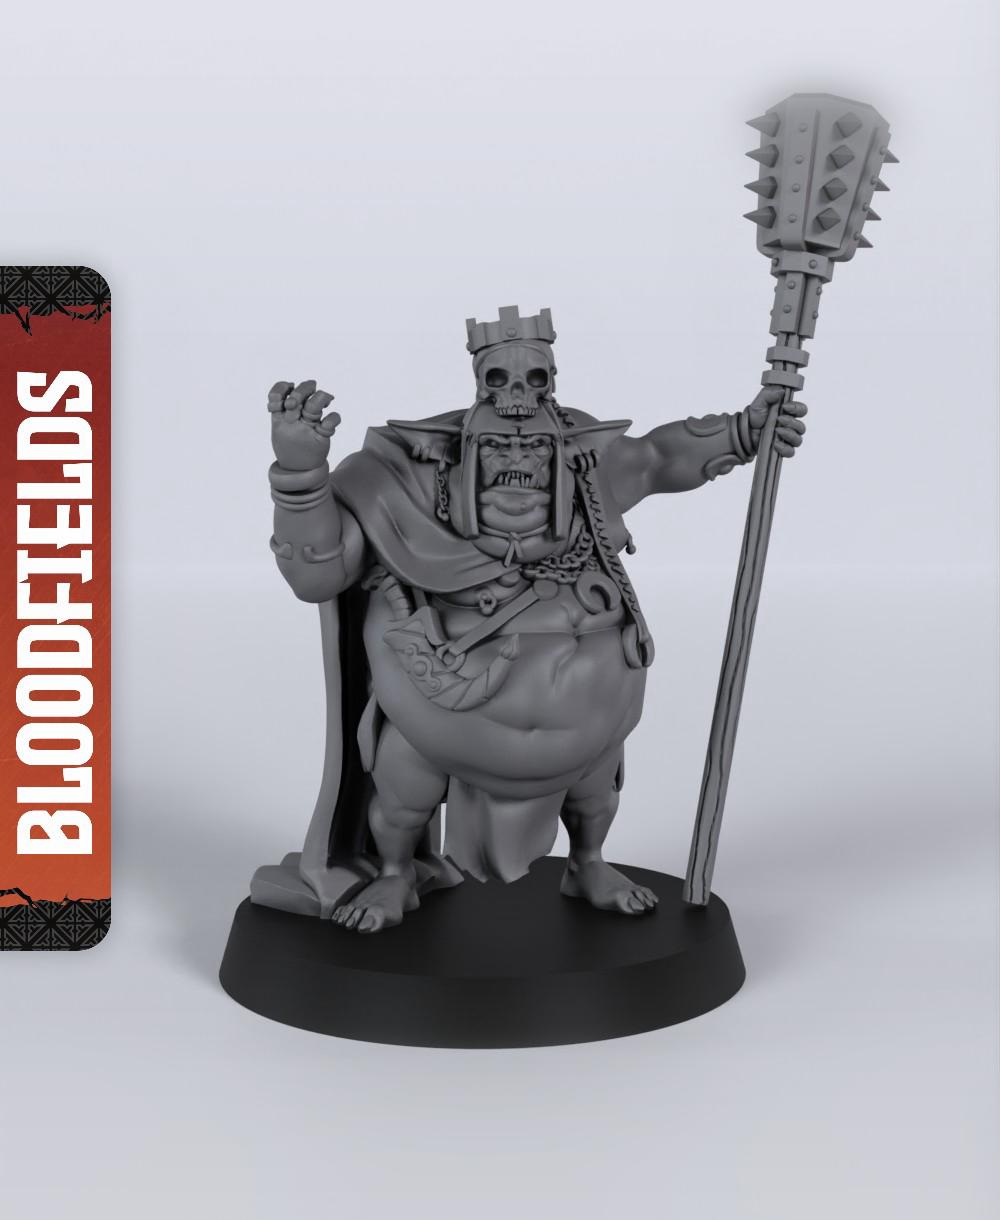 King Obbleh - With Free Dragon Warhammer - 5e DnD Inspired for RPG and Wargamers 3d model